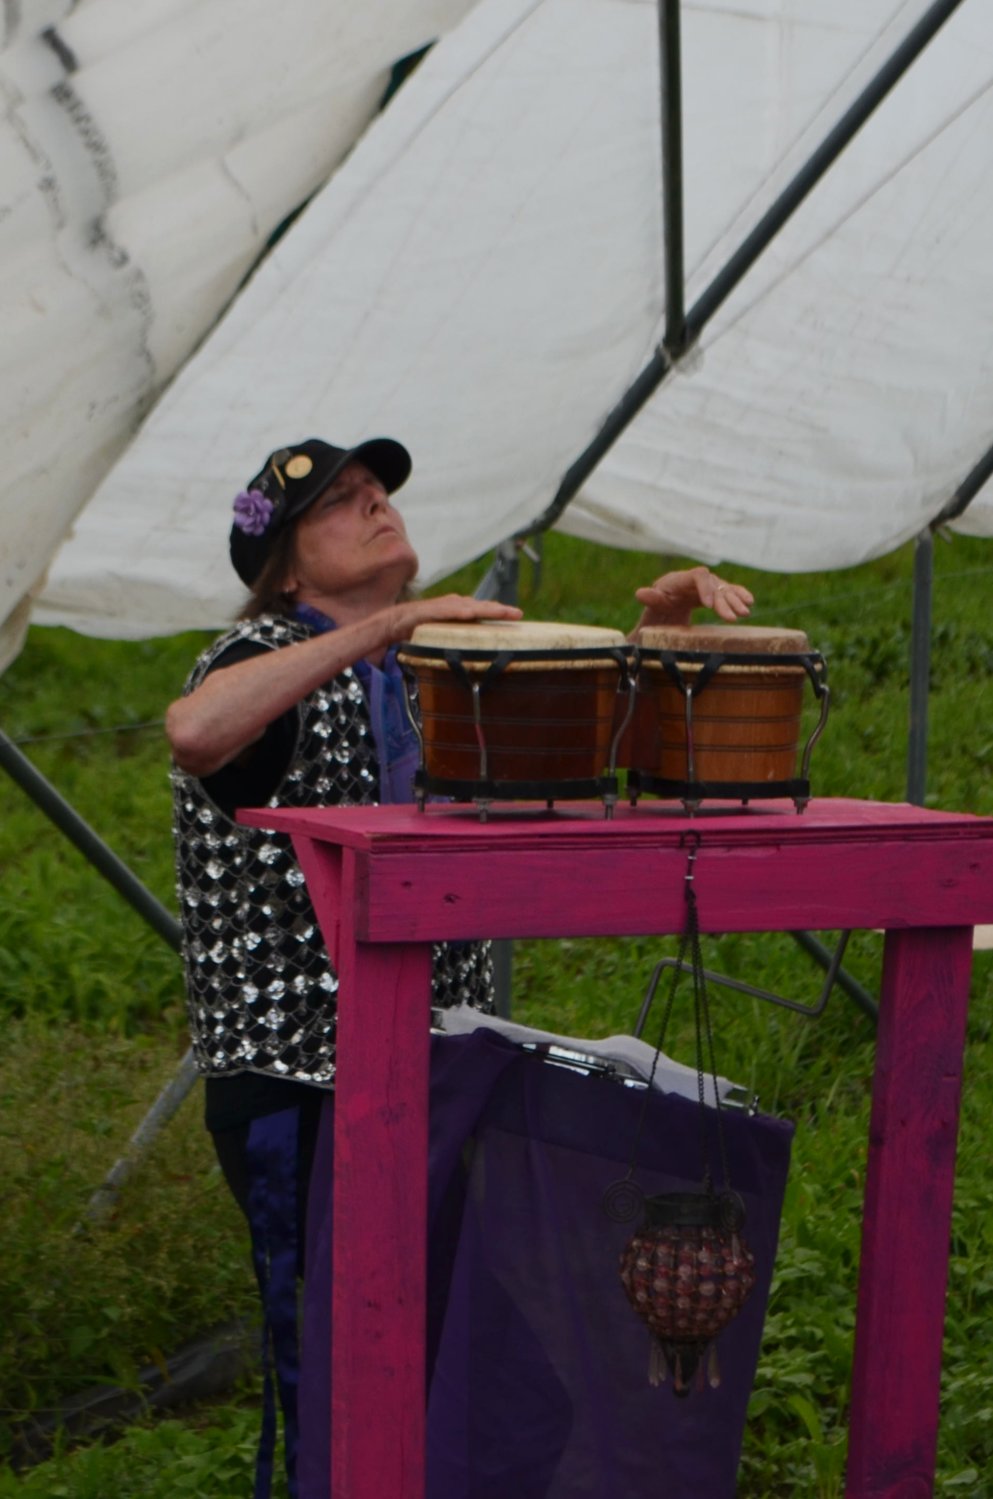 Pam Arnold providing accompaniment on the drums.